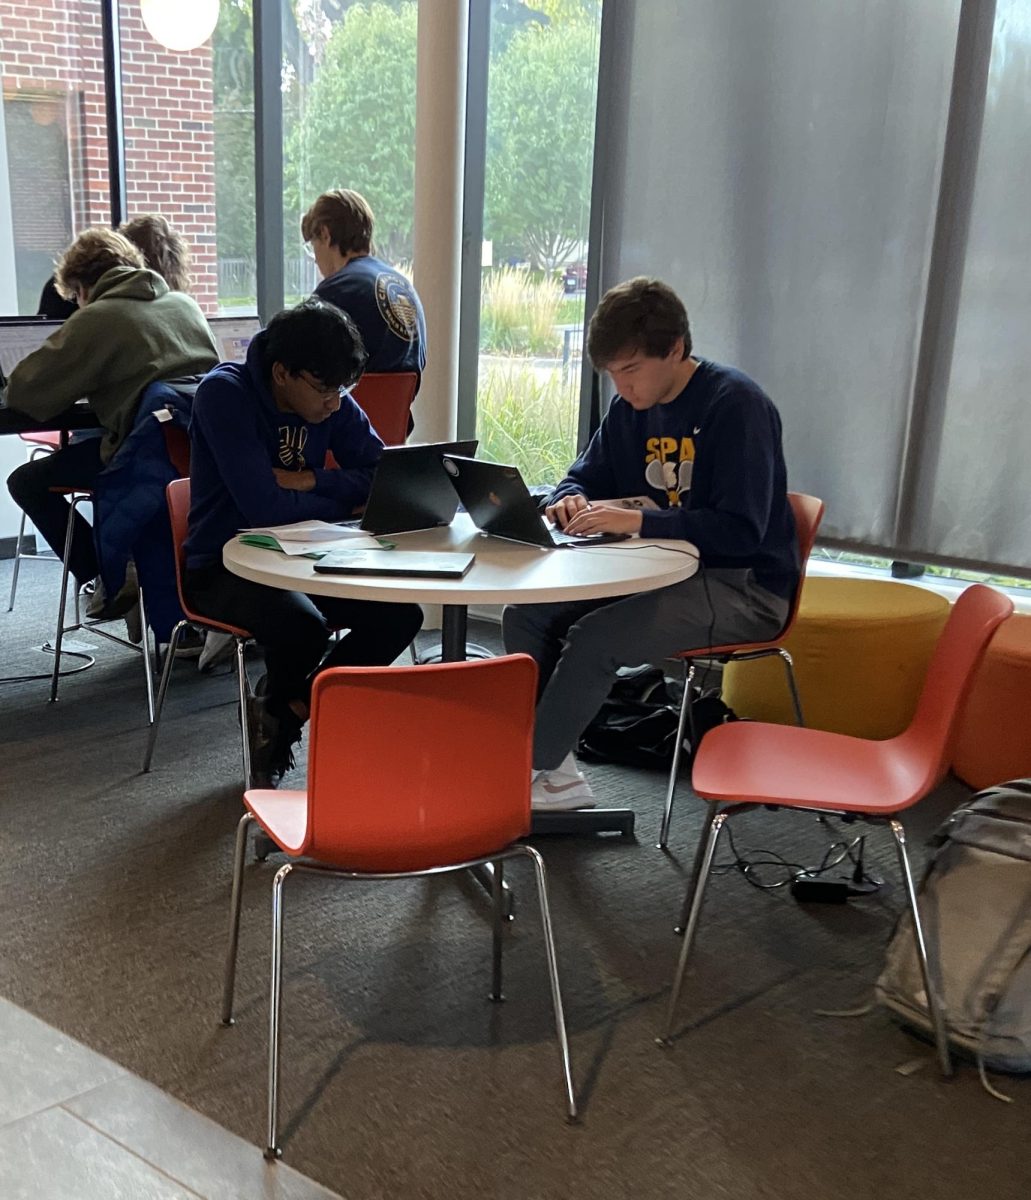 I LOVE MONDAYS. Senior Rusheek Kolan sits in Schilling and finishes up his homework with his friend on a lovely Monday morning: “I like Mondays because I love school,” he said.